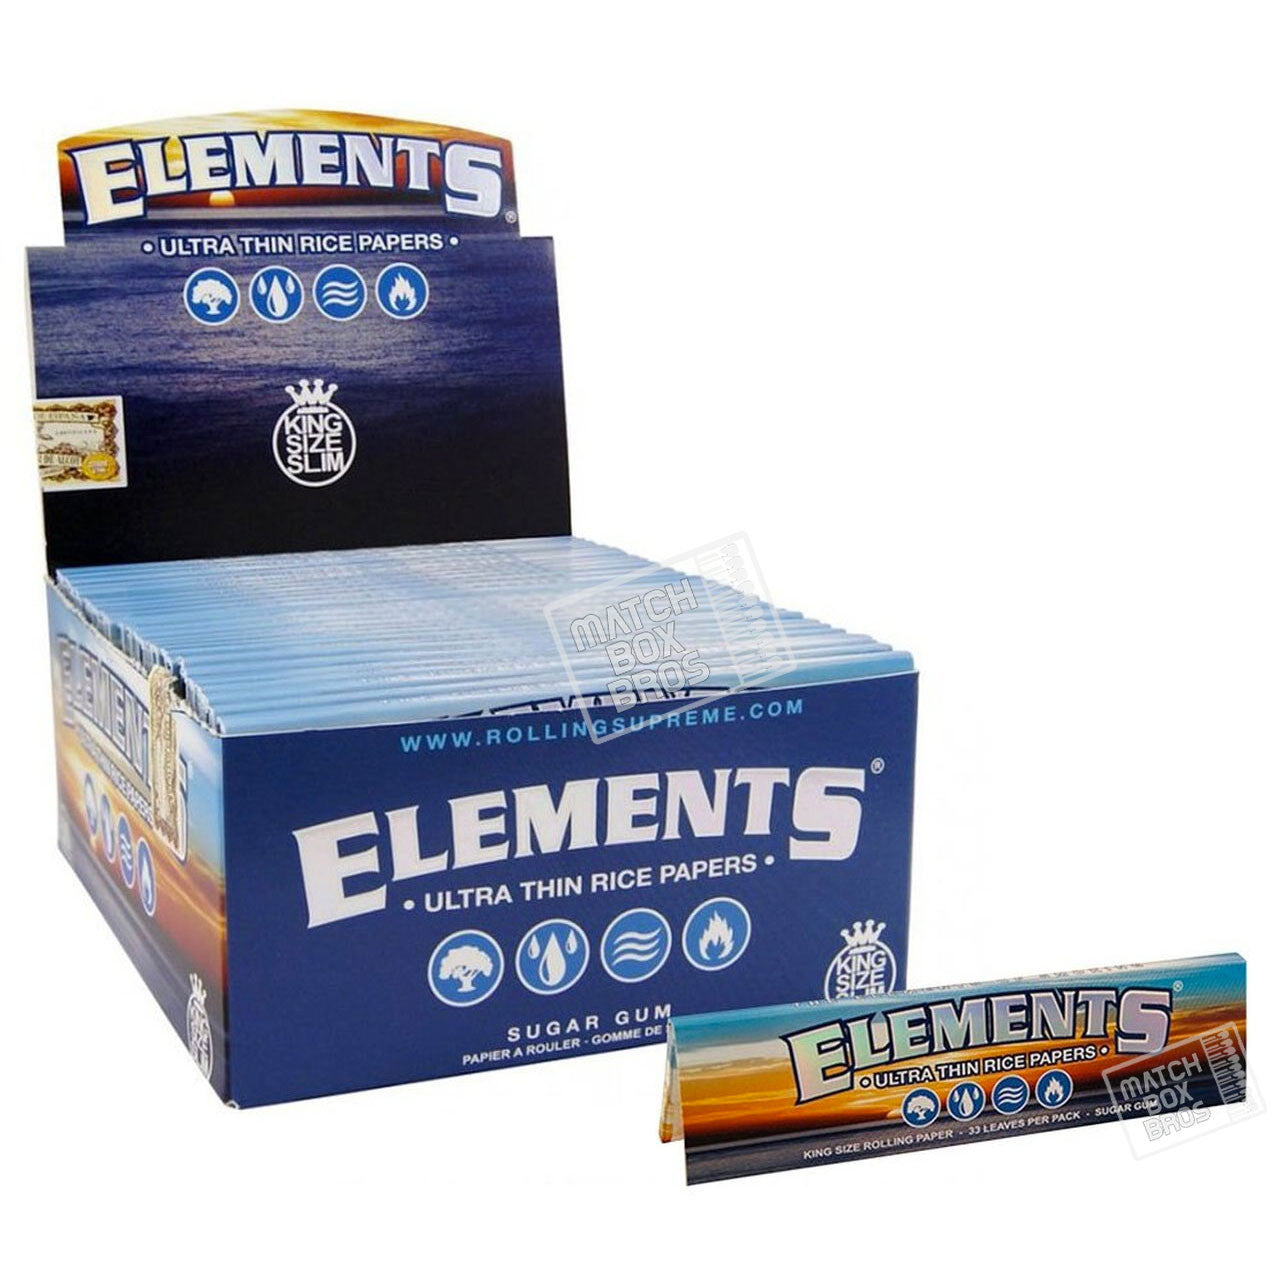 Elements King Size Rolling Papers